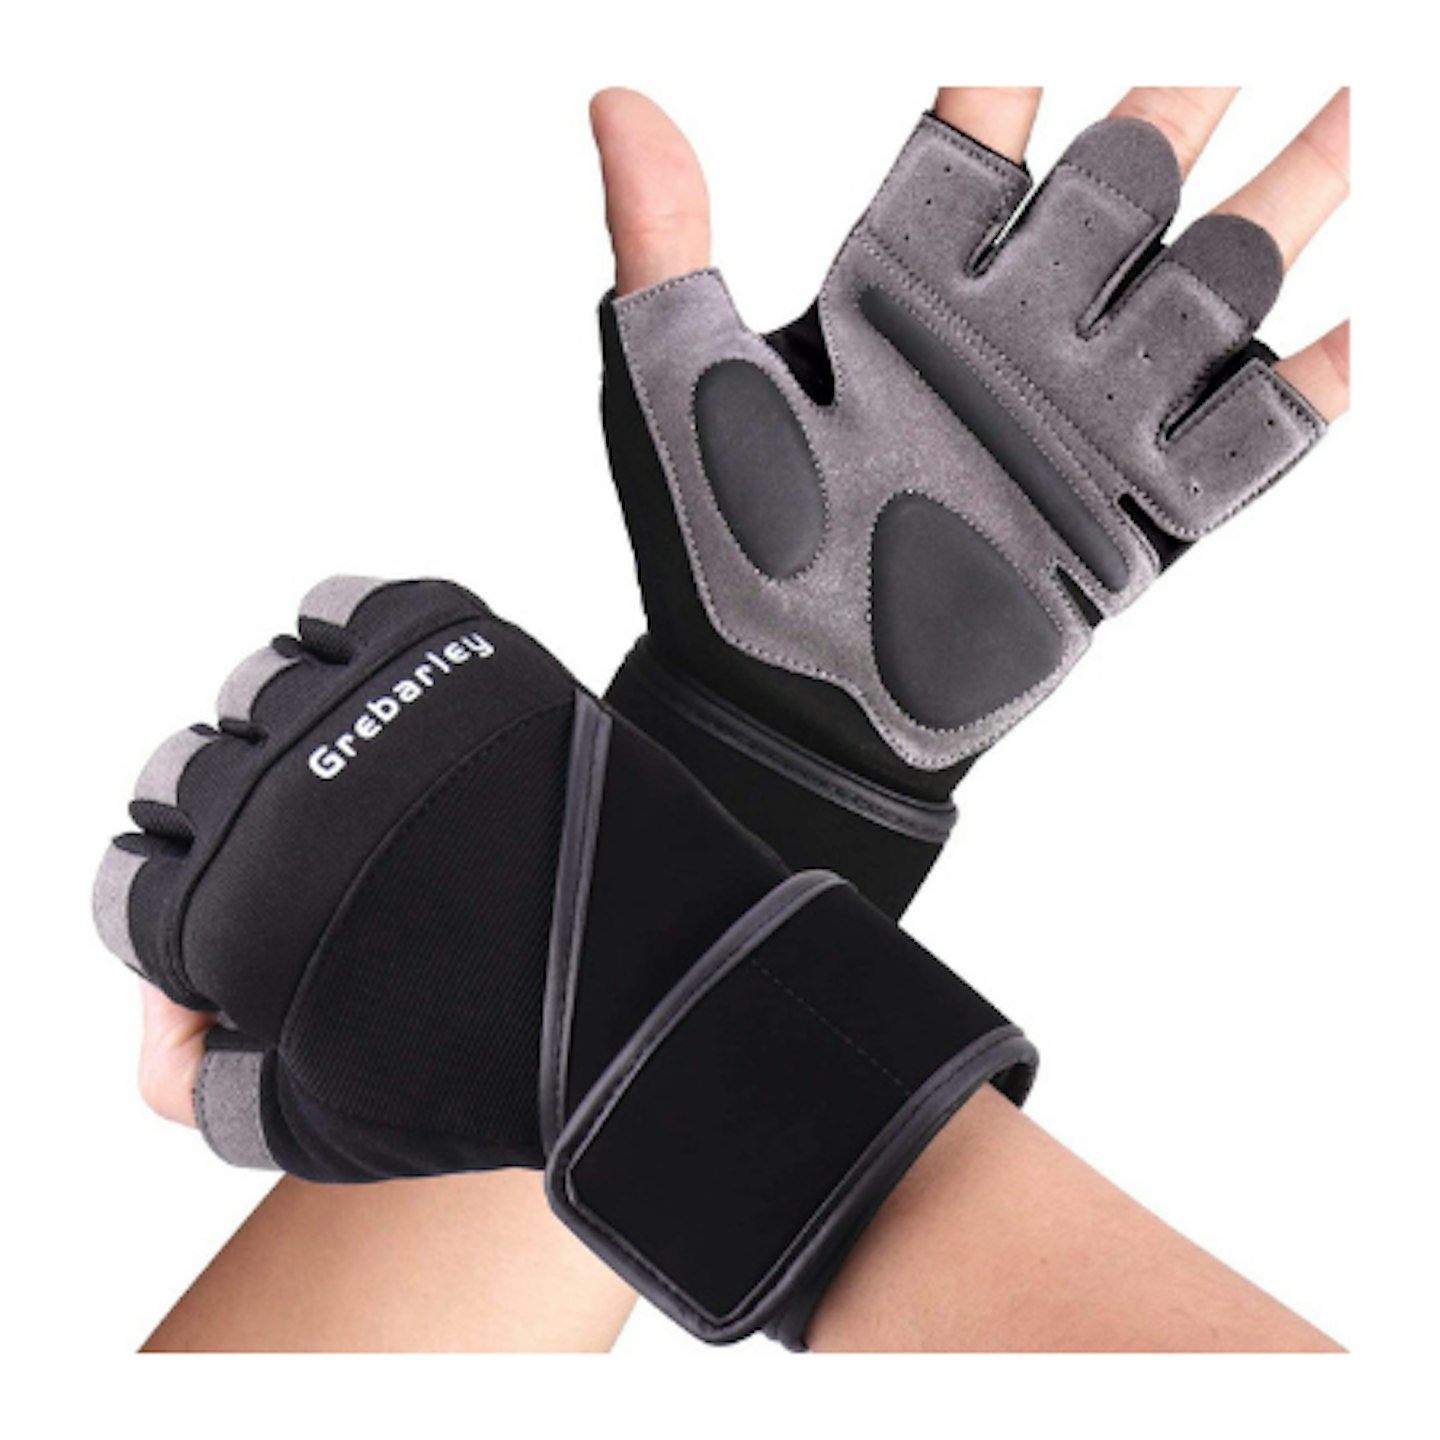 Keep Your Hands Safe With The Best Weightlifting Gloves